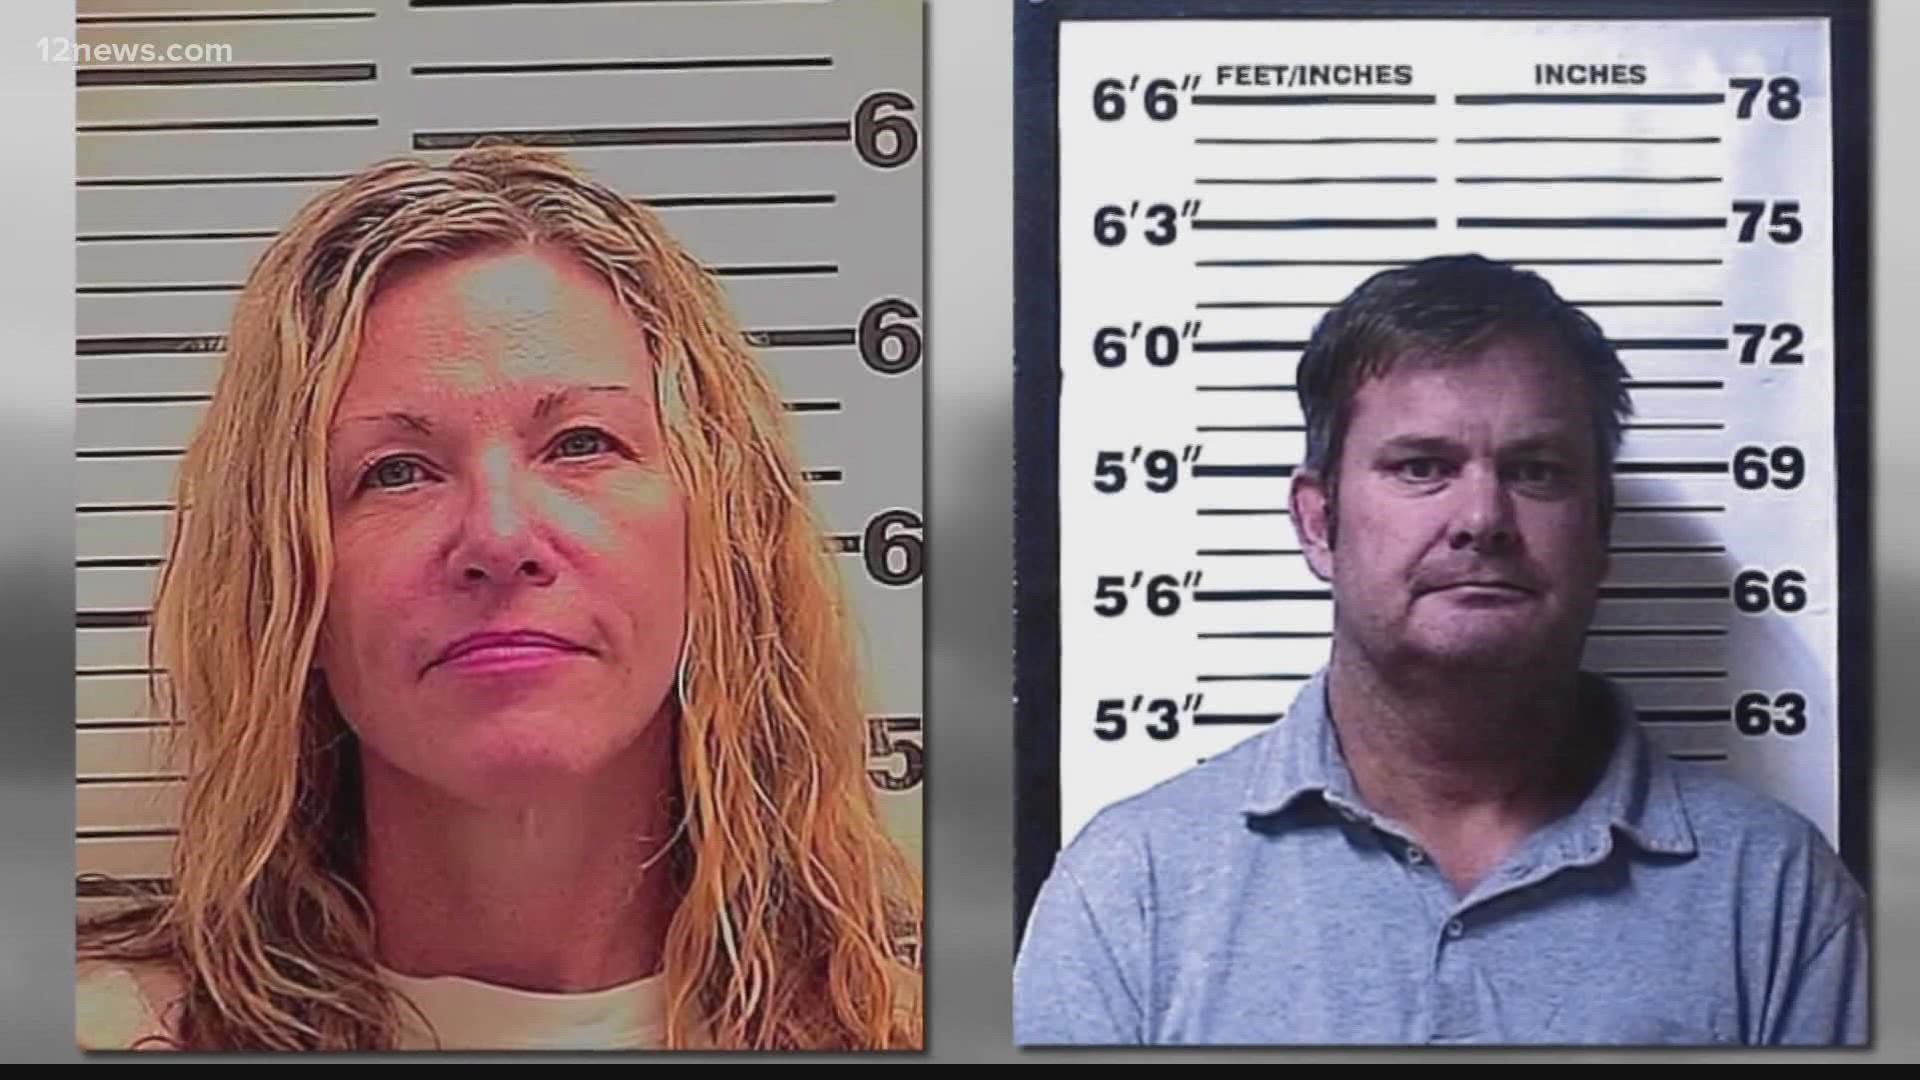 Gilbert police recommended attempted murder charges for Chad and Lori Vallow Daybell in a 2019 shooting investigation. Charges for Lori are still under review.